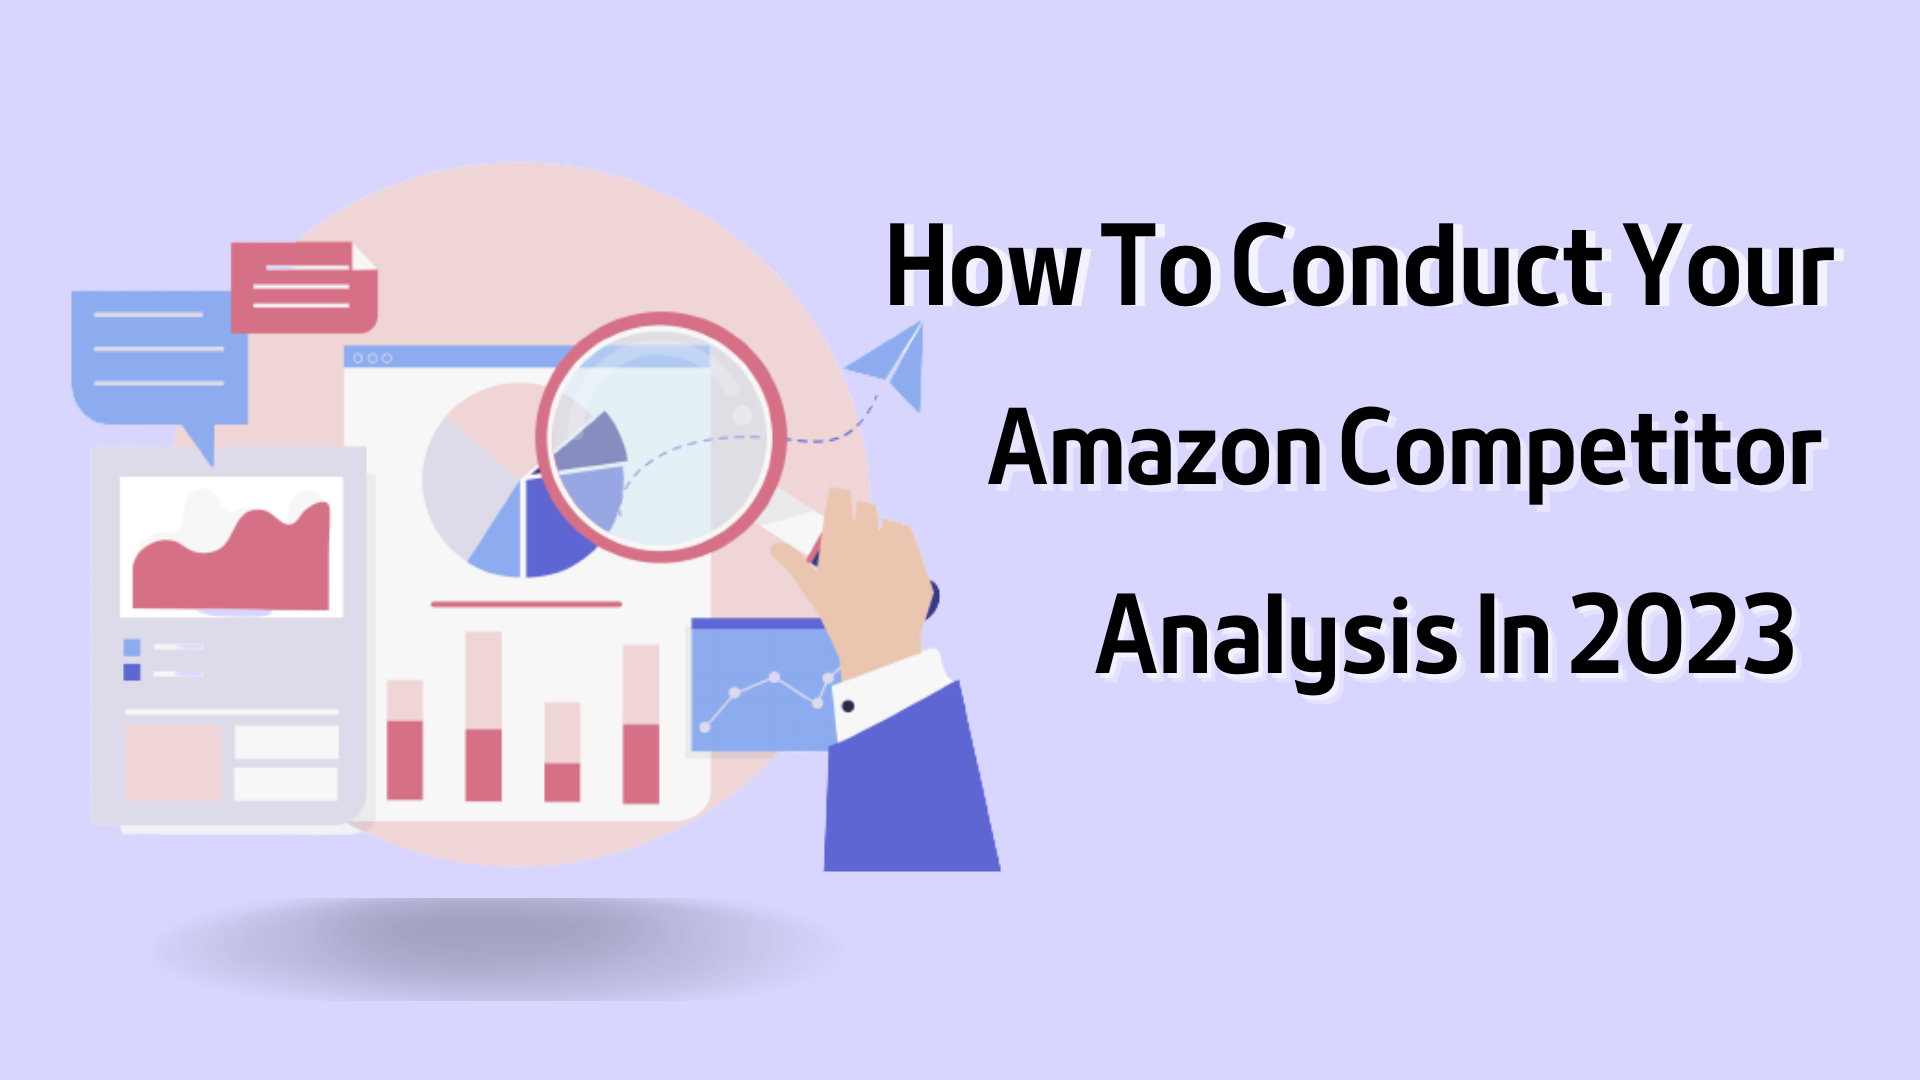 How To Conduct Your Amazon Competitor Analysis In 2023